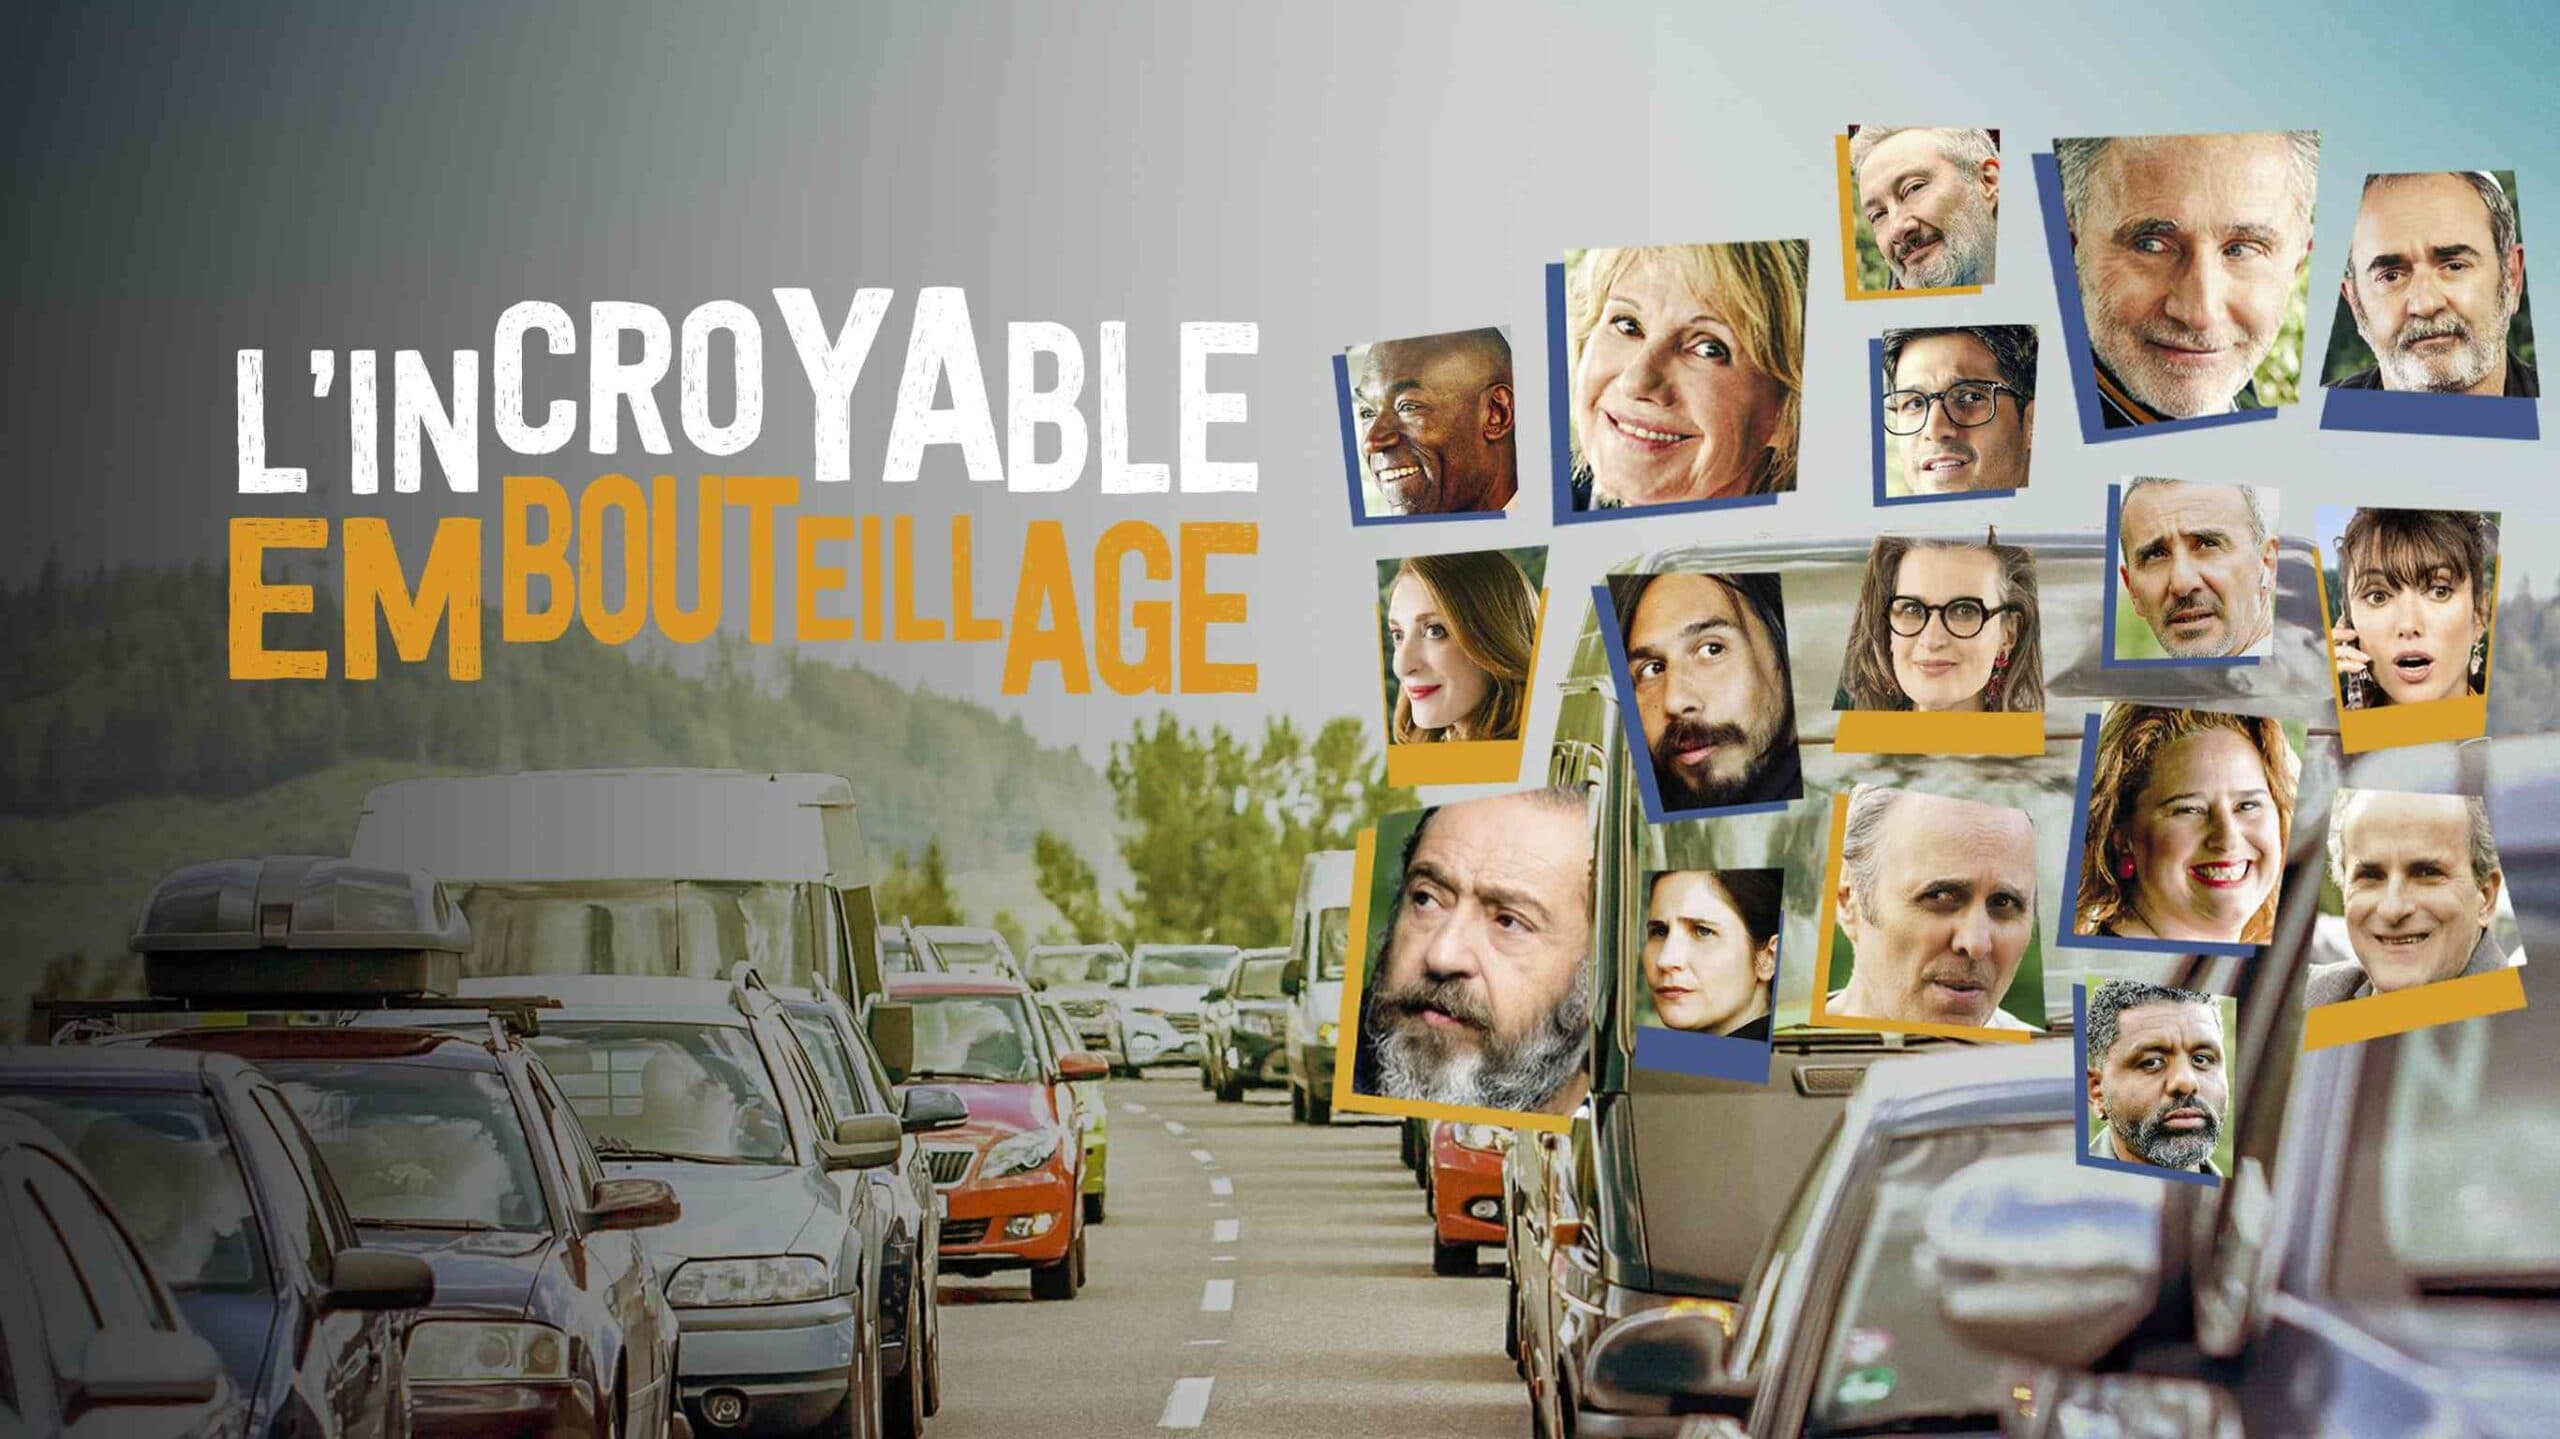 L'incroyable embouteillage